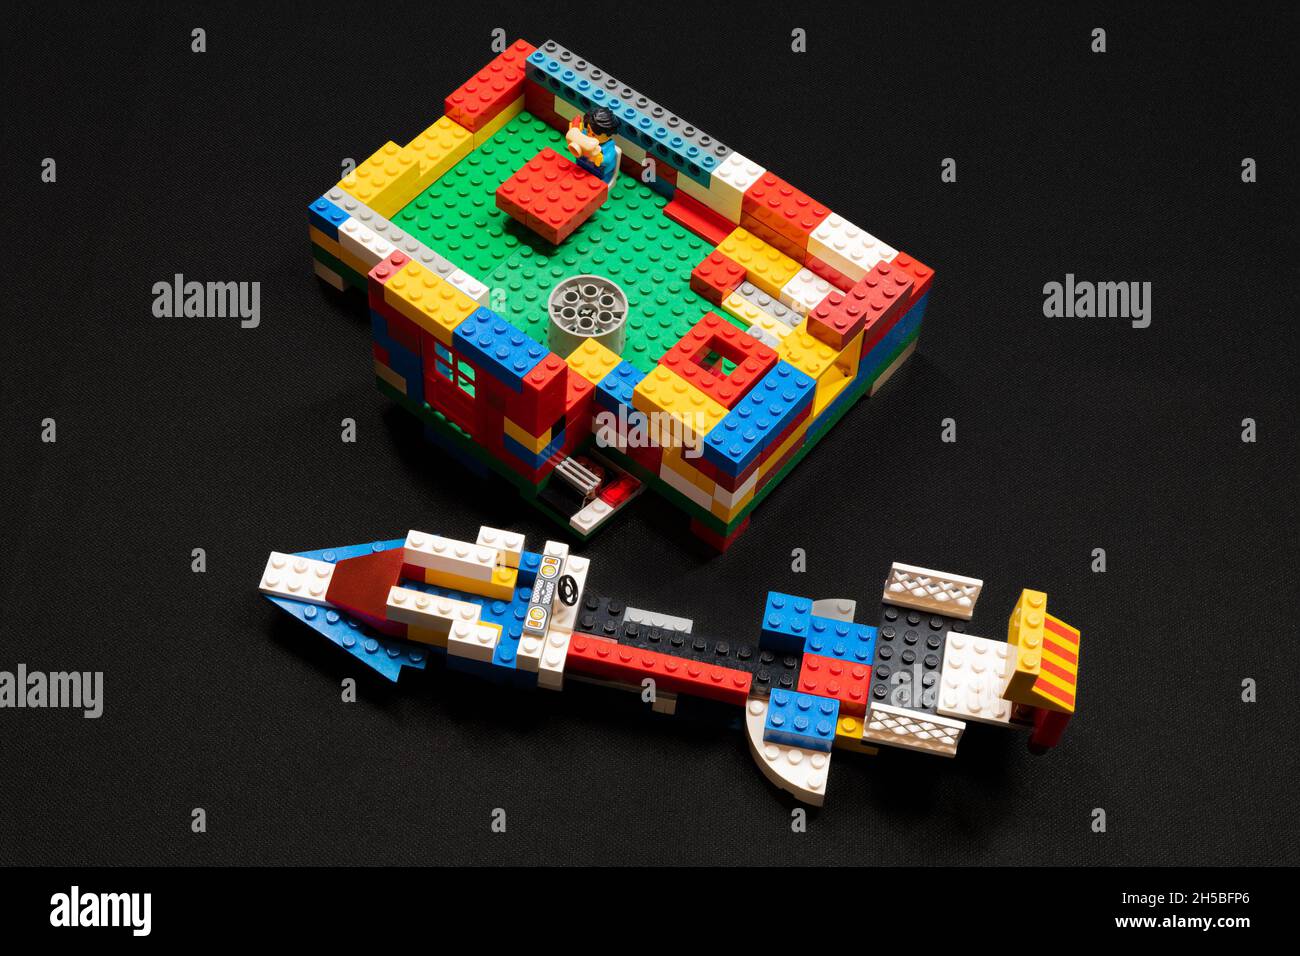 Irvine, Scotland, UK - November 07,  2021: Children’s lego branded plastic brick set partially assembled with bricks of varying colour shapes and size Stock Photo